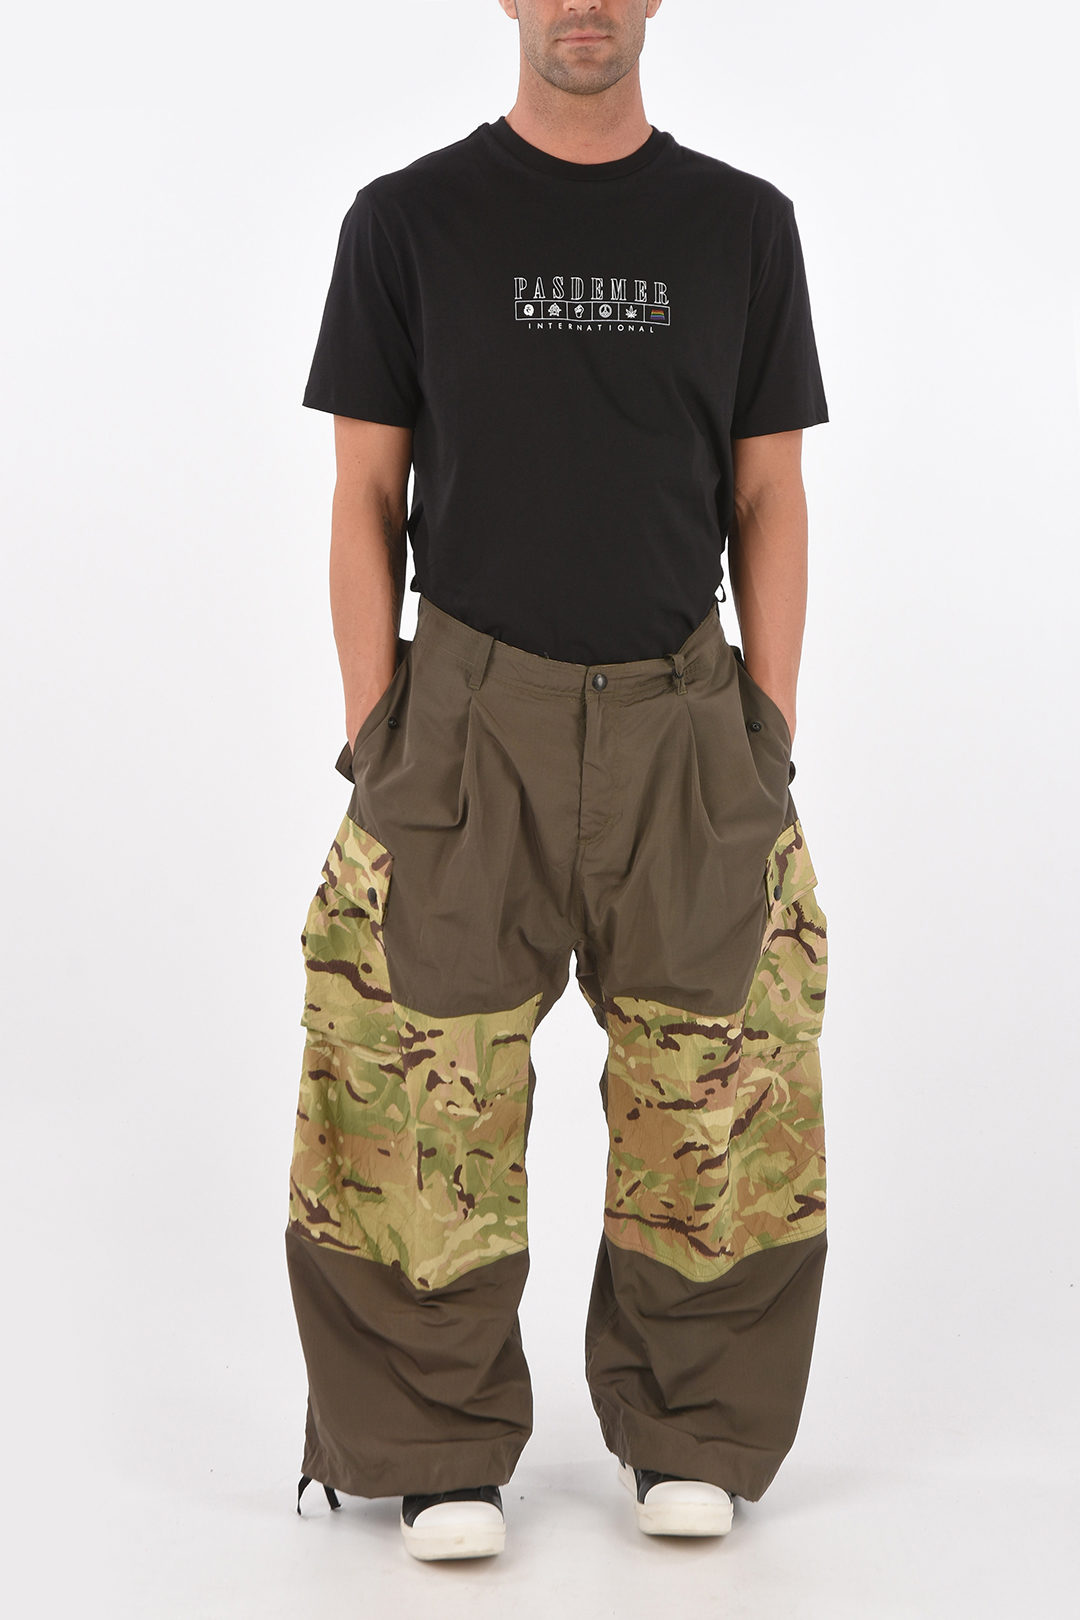 Griffin camouflage oversized cargo pants men - Glamood Outlet